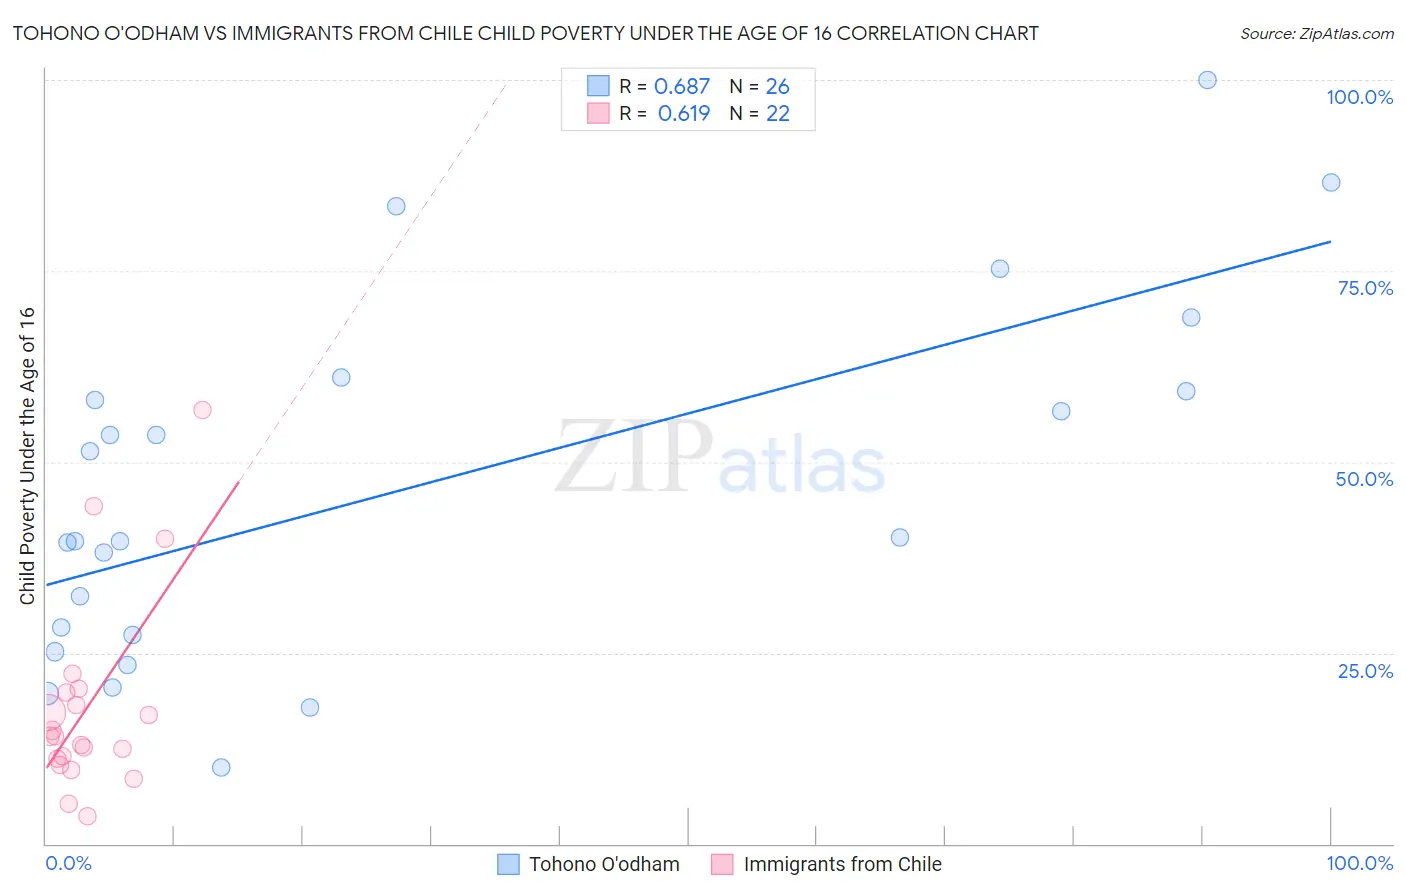 Tohono O'odham vs Immigrants from Chile Child Poverty Under the Age of 16